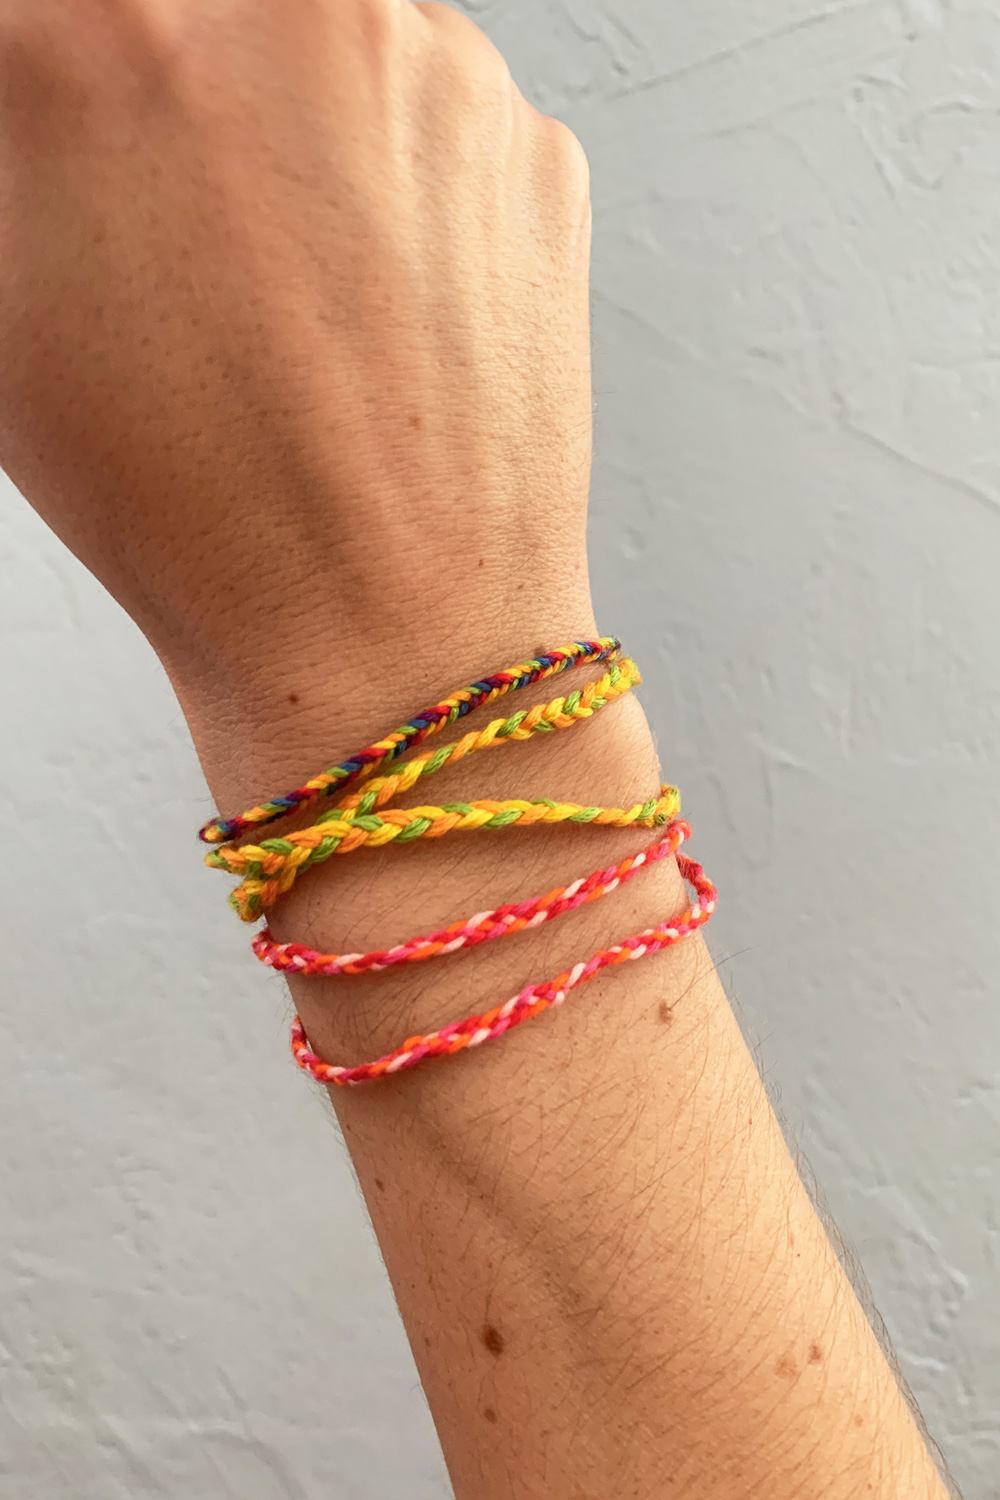 Buy Thin Friendship Bracelet Cotton Thread Wrapped Bracelet Wrist Stacks  Best Friend Gift Colorful Boho Chic Teens Gift Online in India - Etsy